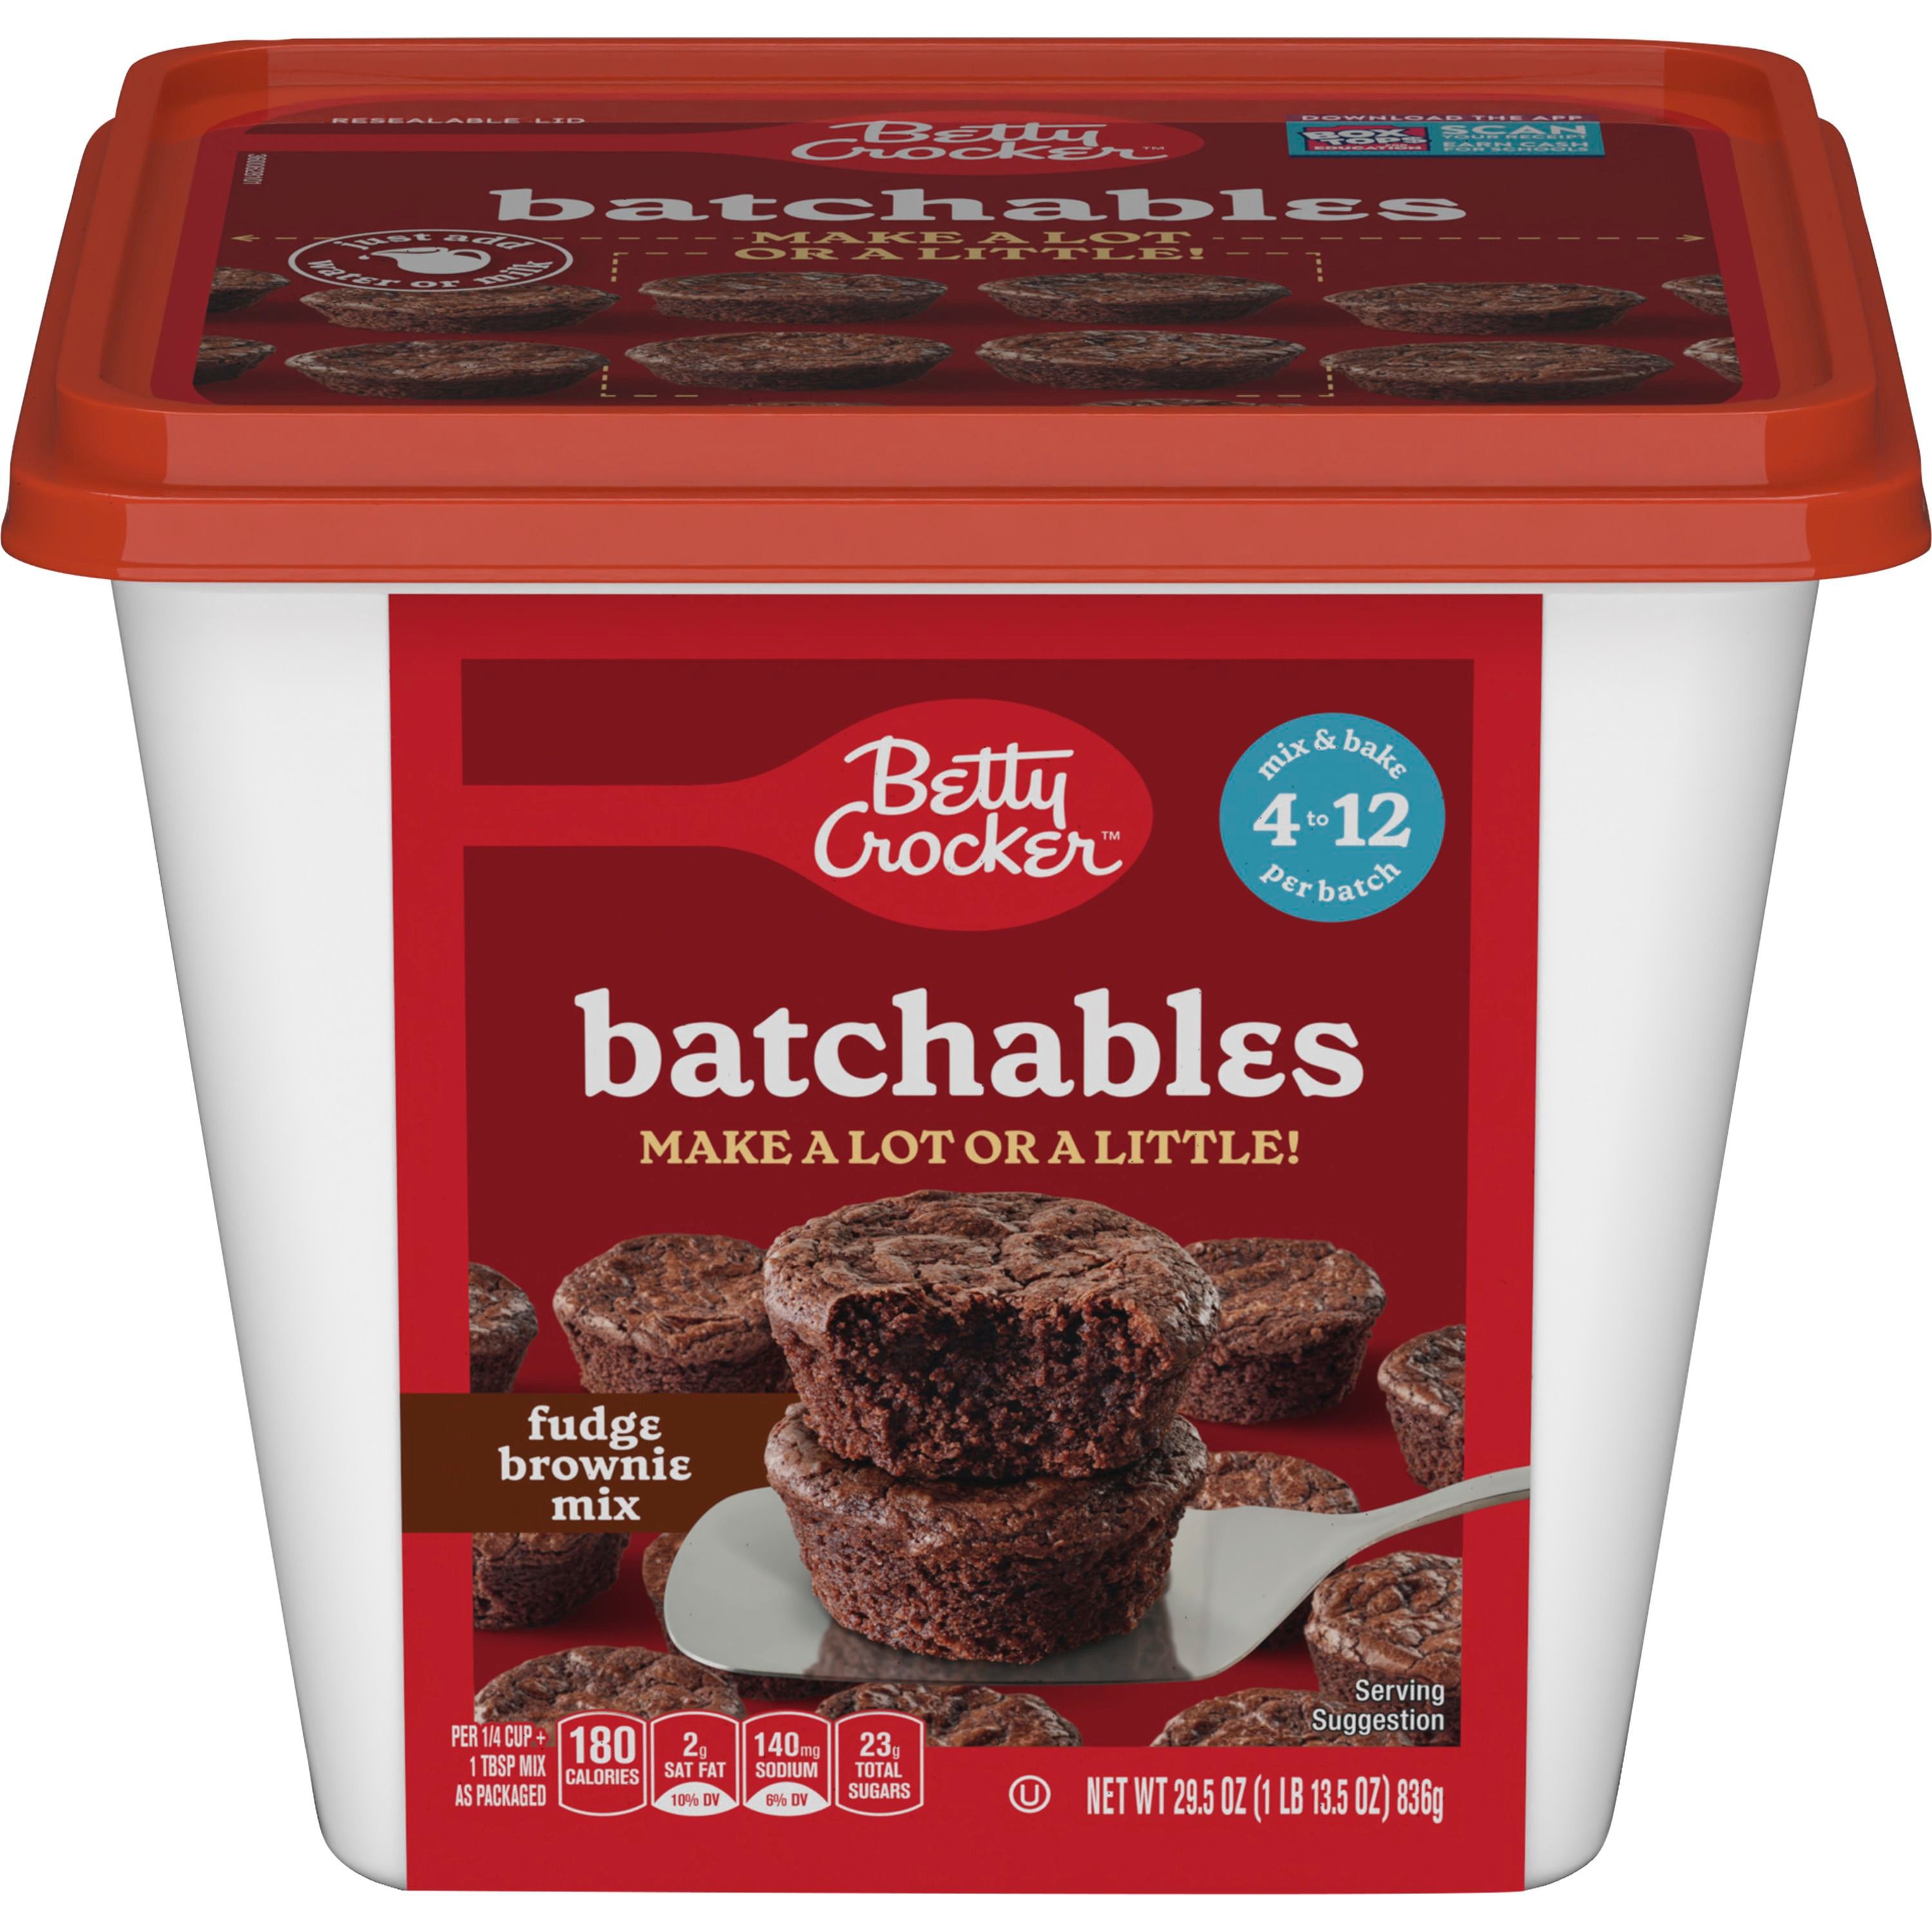 Betty Crocker Batchables Fudge Brownie Mix, Mix and Bake 4 to 12 per batch, 29.5 oz. - Front